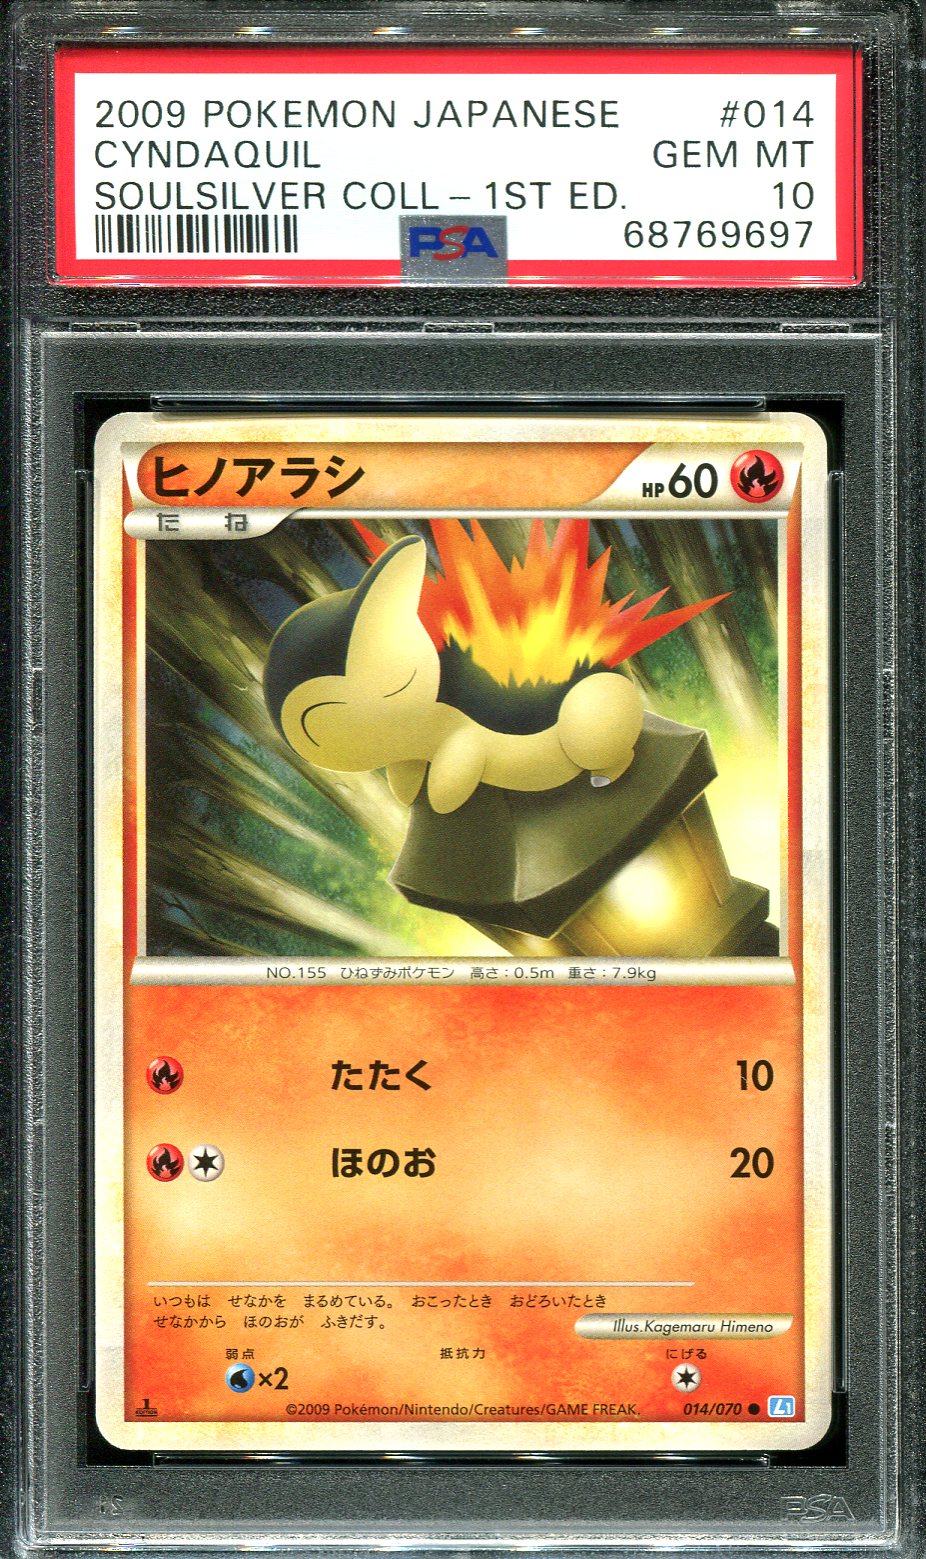 CYNDAQUIL 014/070 PSA 10 POKEMON SOULSILVER COLLECTION L1 JAPANESE 1ST EDITION